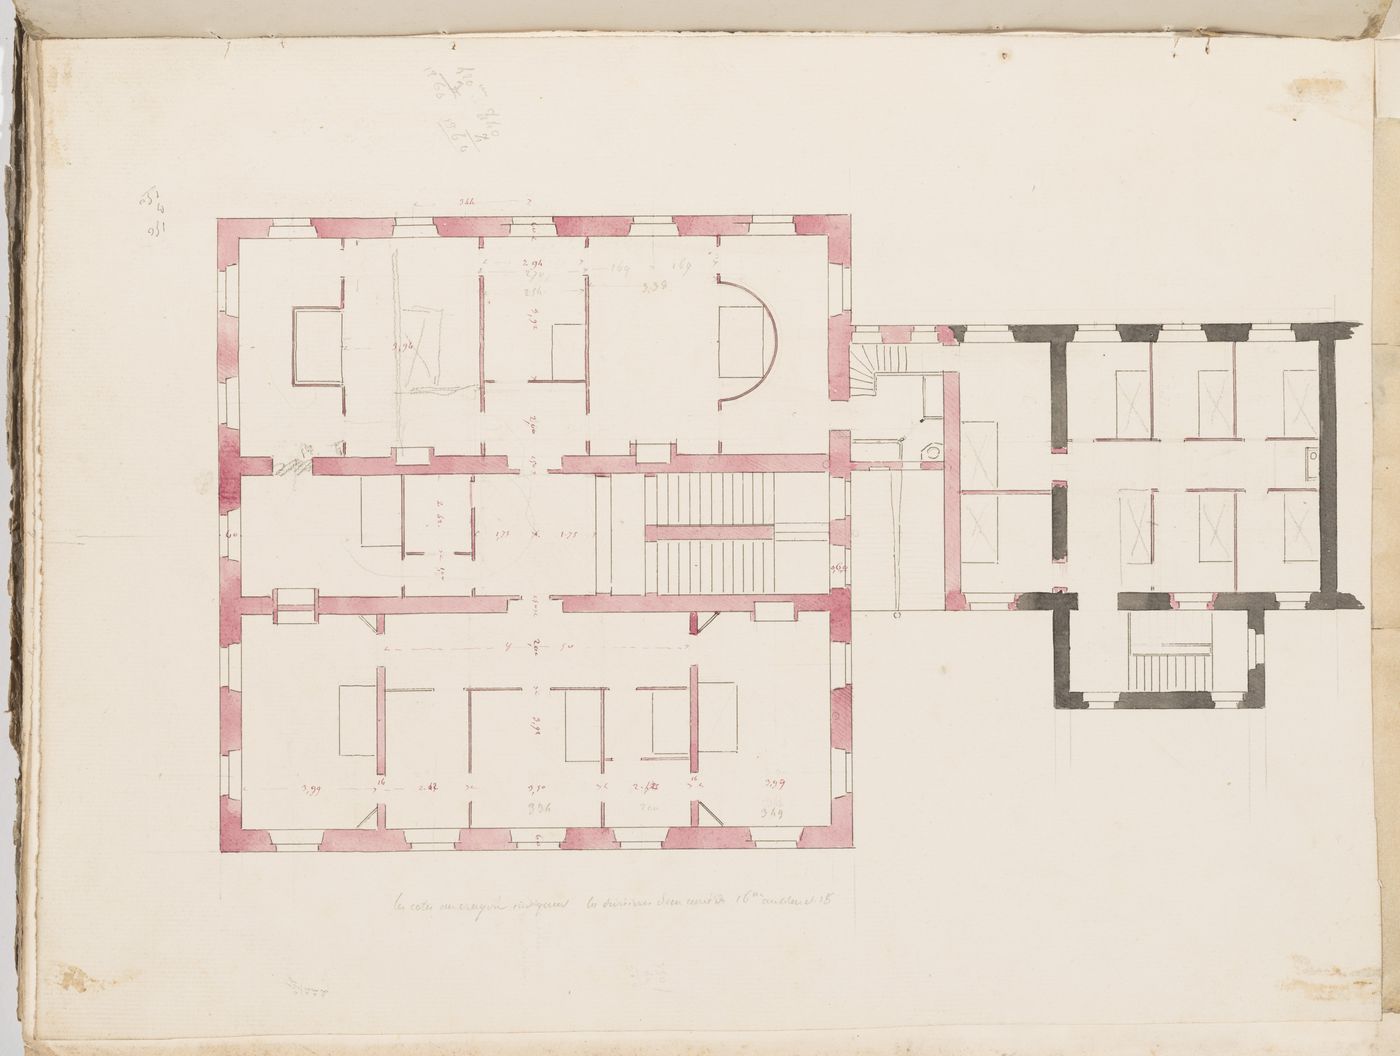 Project no. 8 for a country house for comte Treilhard: First floor plan